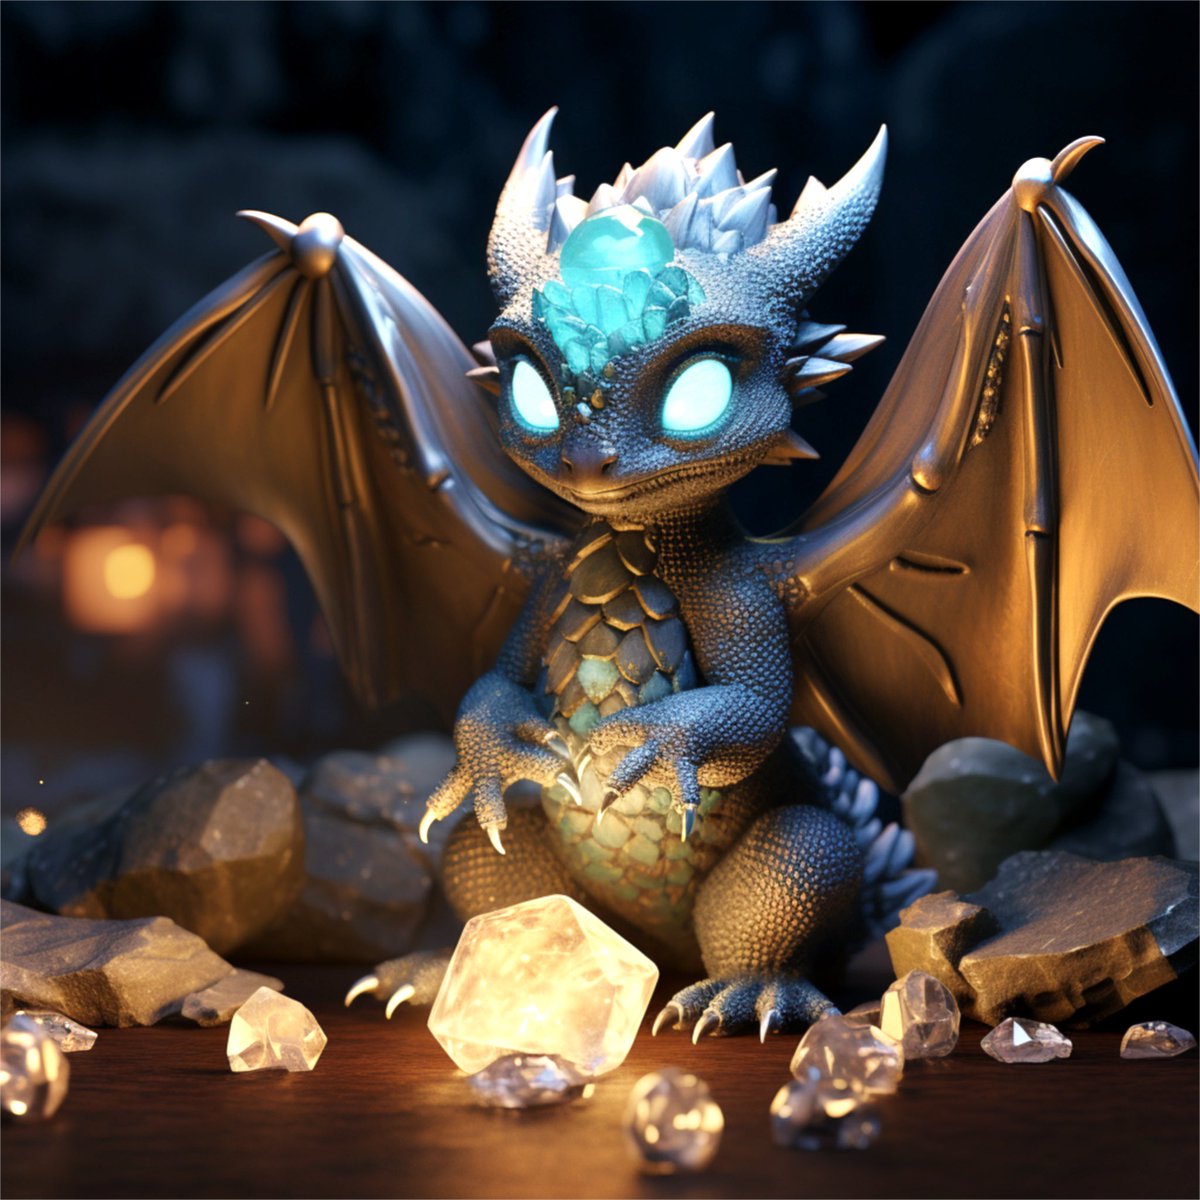 🐲 Giveaway 🐲

Fantasy Dragon 24 and 25

Drop your wallet 
Follow me, Like, RP & tag friends 
24Hrs 

Good luck and Thank you for playing! 🐲🥚🐲

#nft #NFTGiveaway #Loopring #L2 #NFTCommmunity